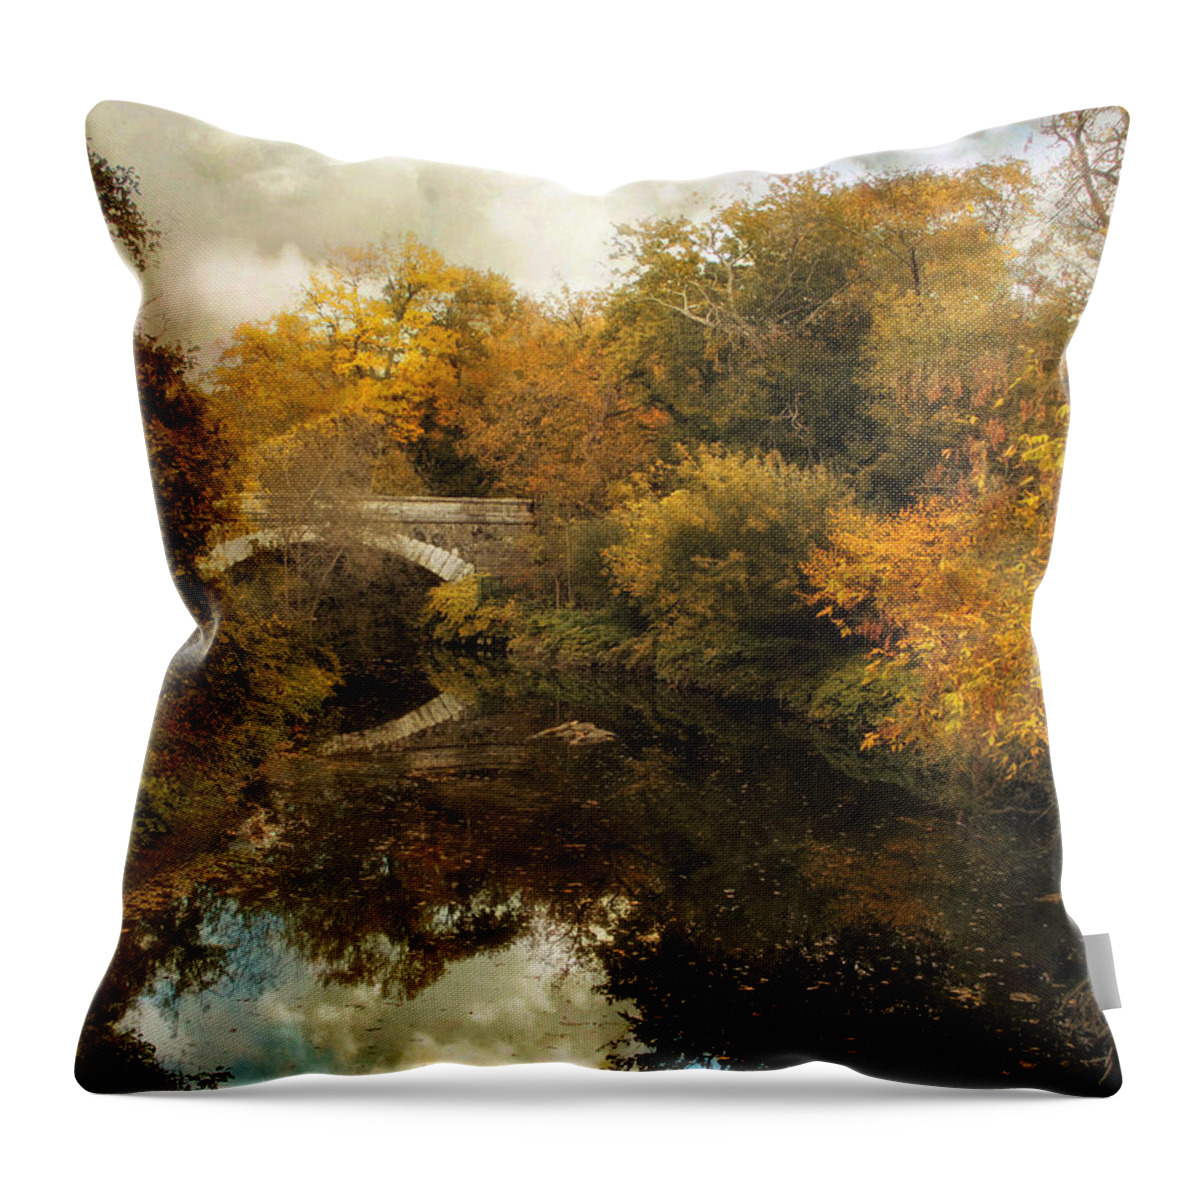 Nature Throw Pillow featuring the photograph A Distant Bridge #2 by Jessica Jenney